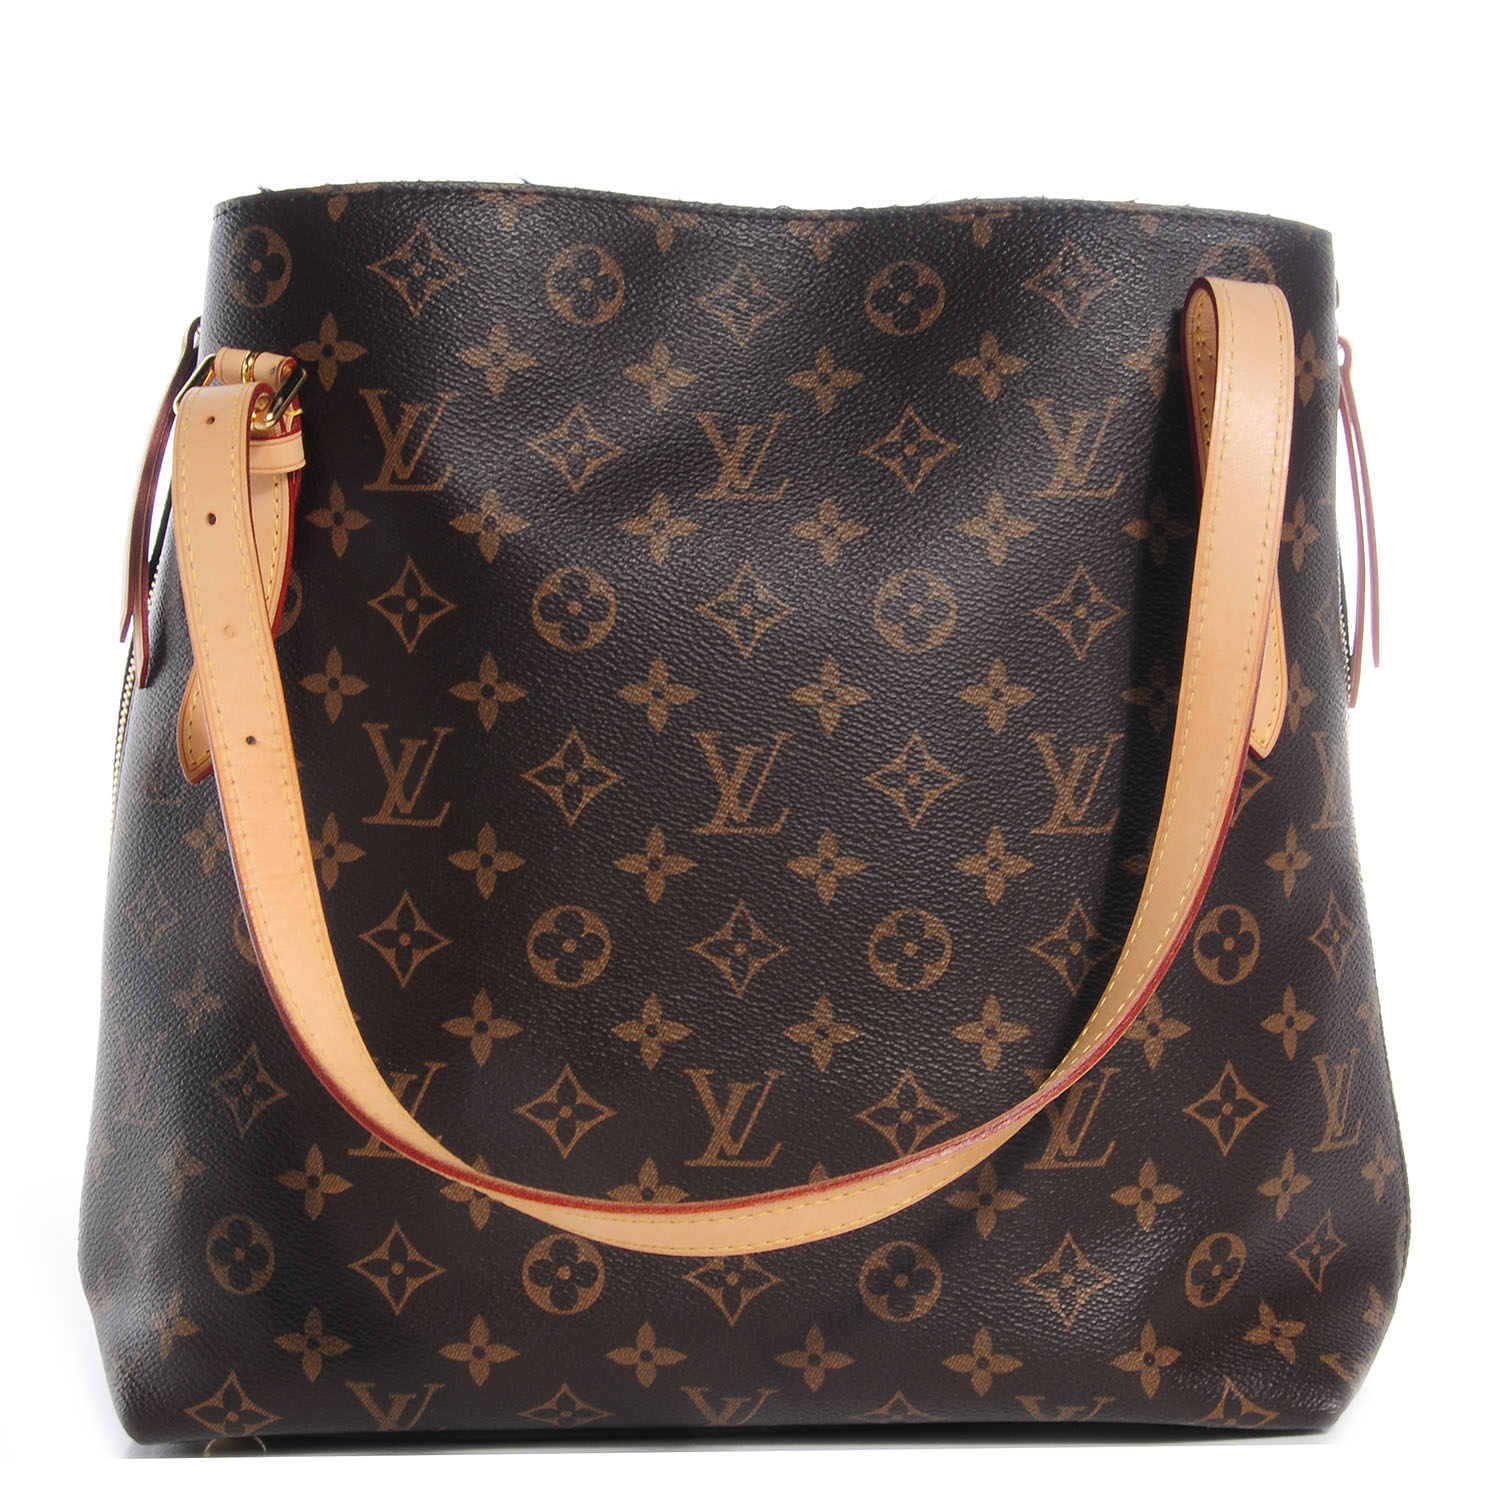 Lv On The Go Tote Organizer  Natural Resource Department